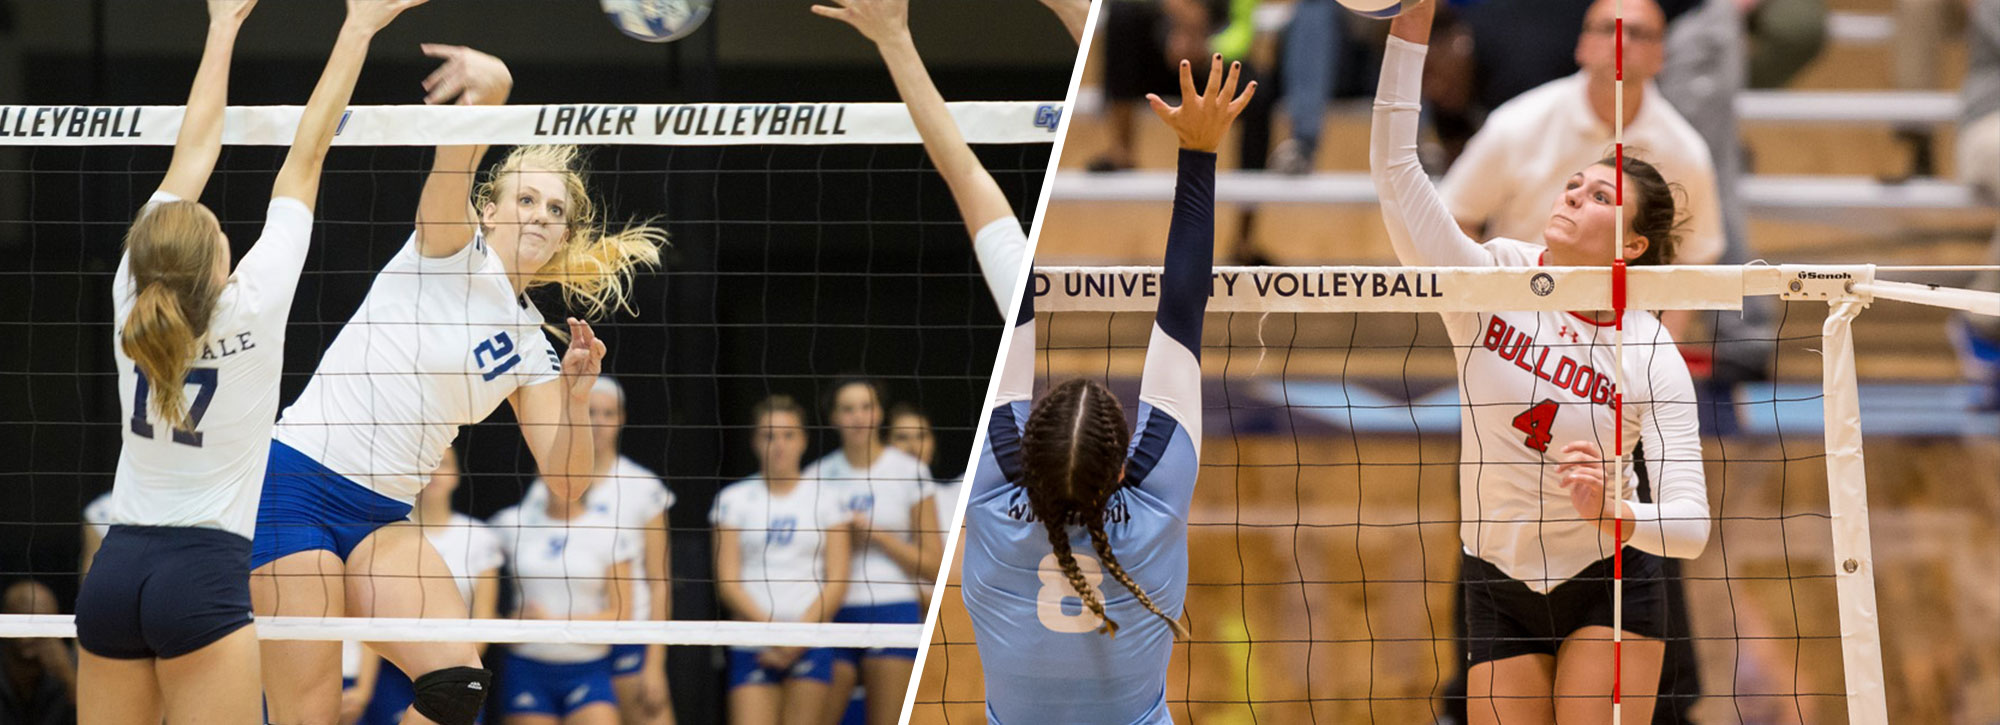 Ferris State's Cappel, Grand Valley State's Brower Named GLIAC Volleyball Players of the Week